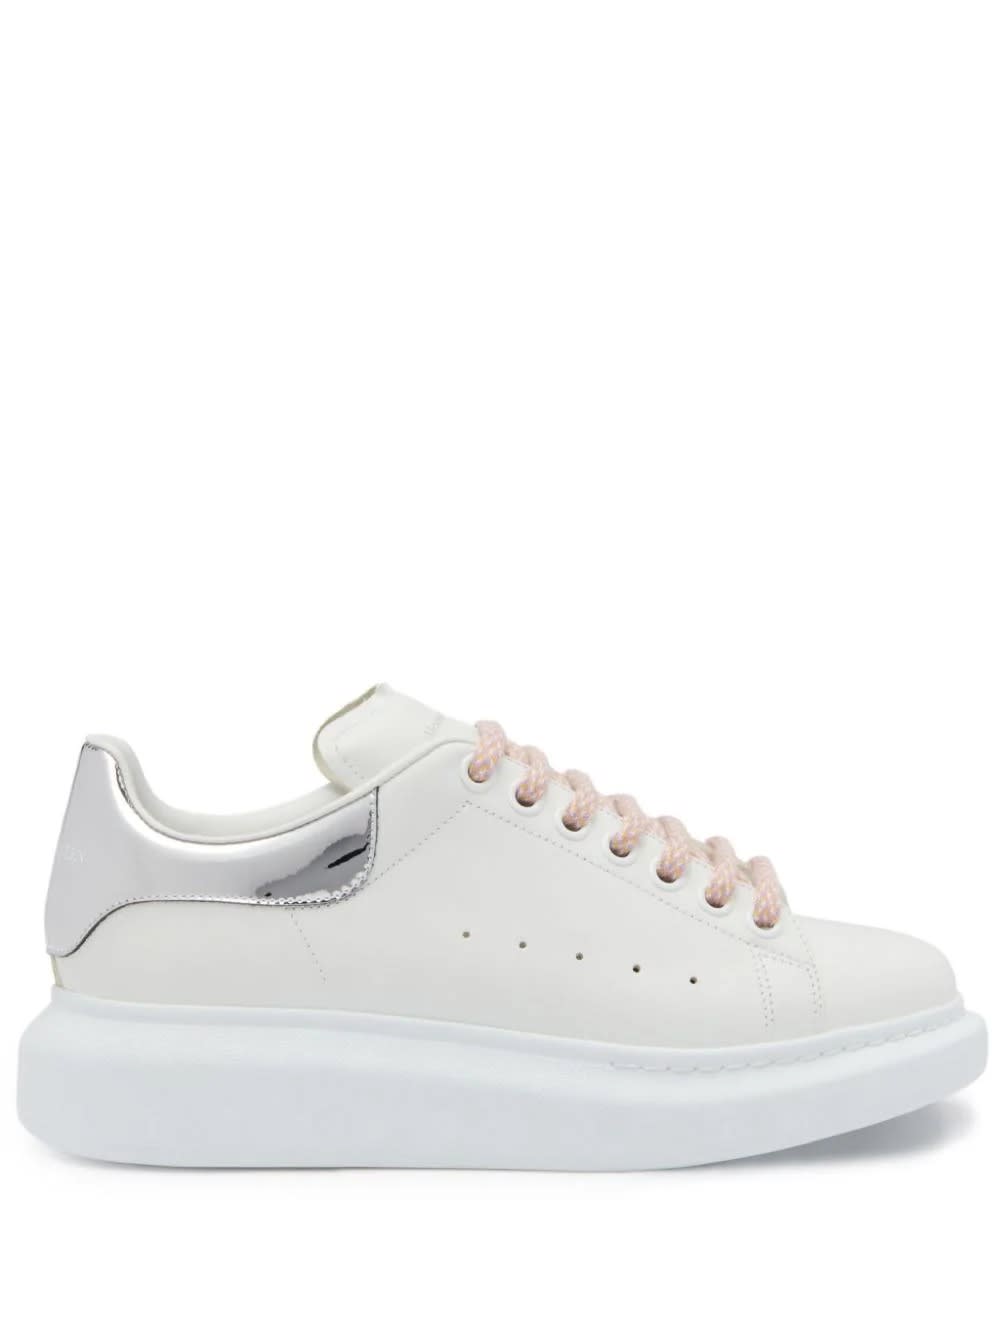 Shop Alexander Mcqueen Oversized Sneakers In White And Silver